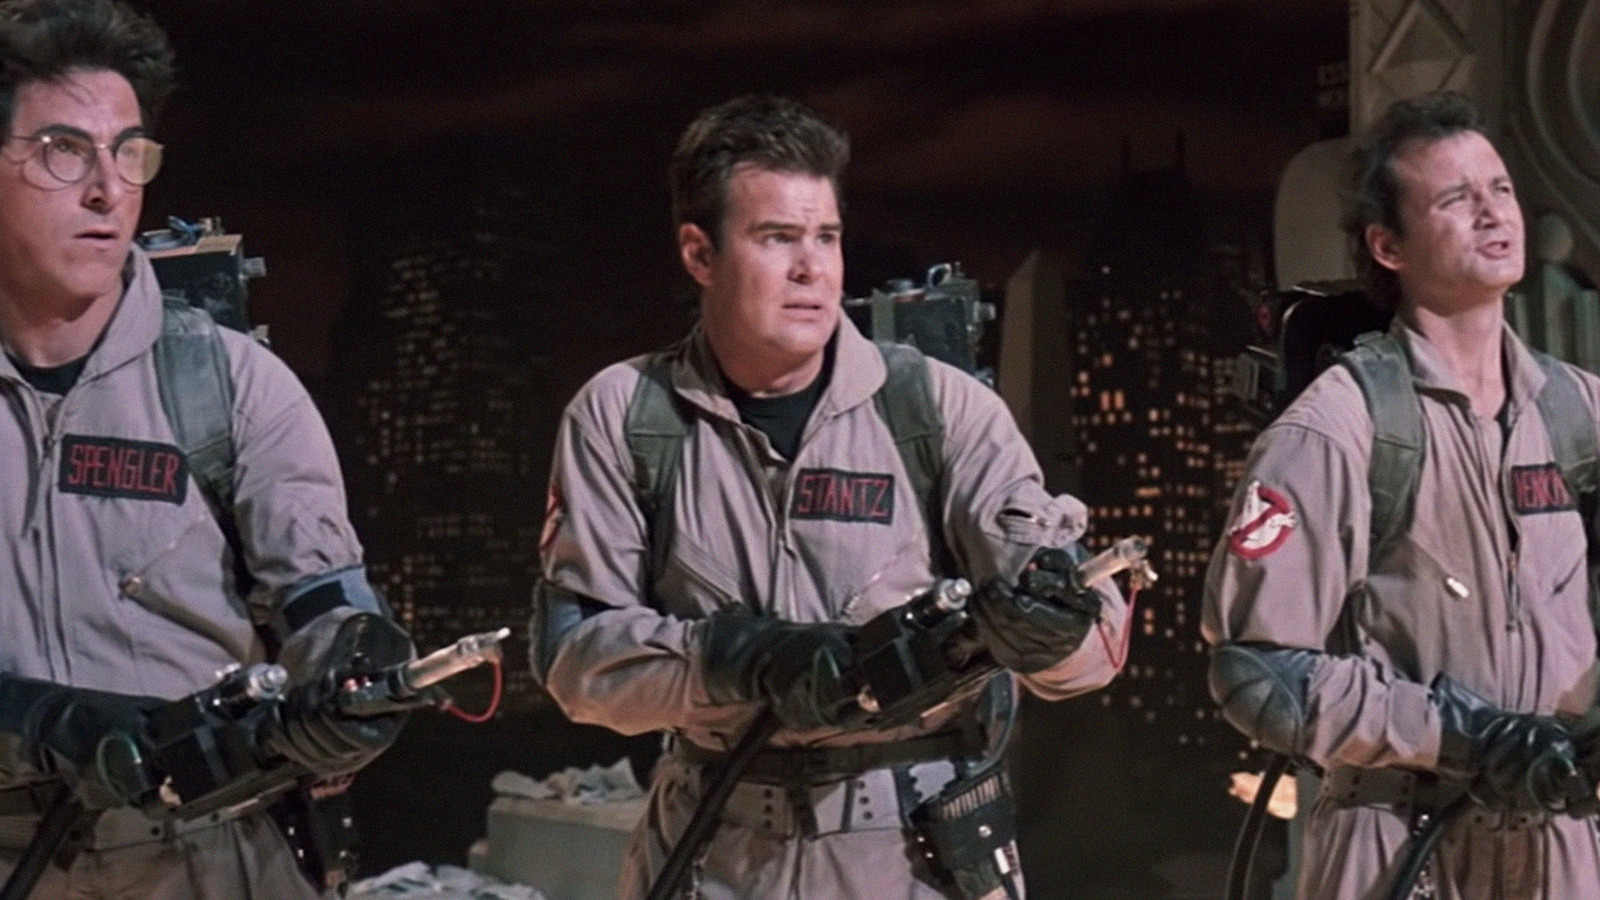 Where Can You Watch The 1984 Ghostbusters?